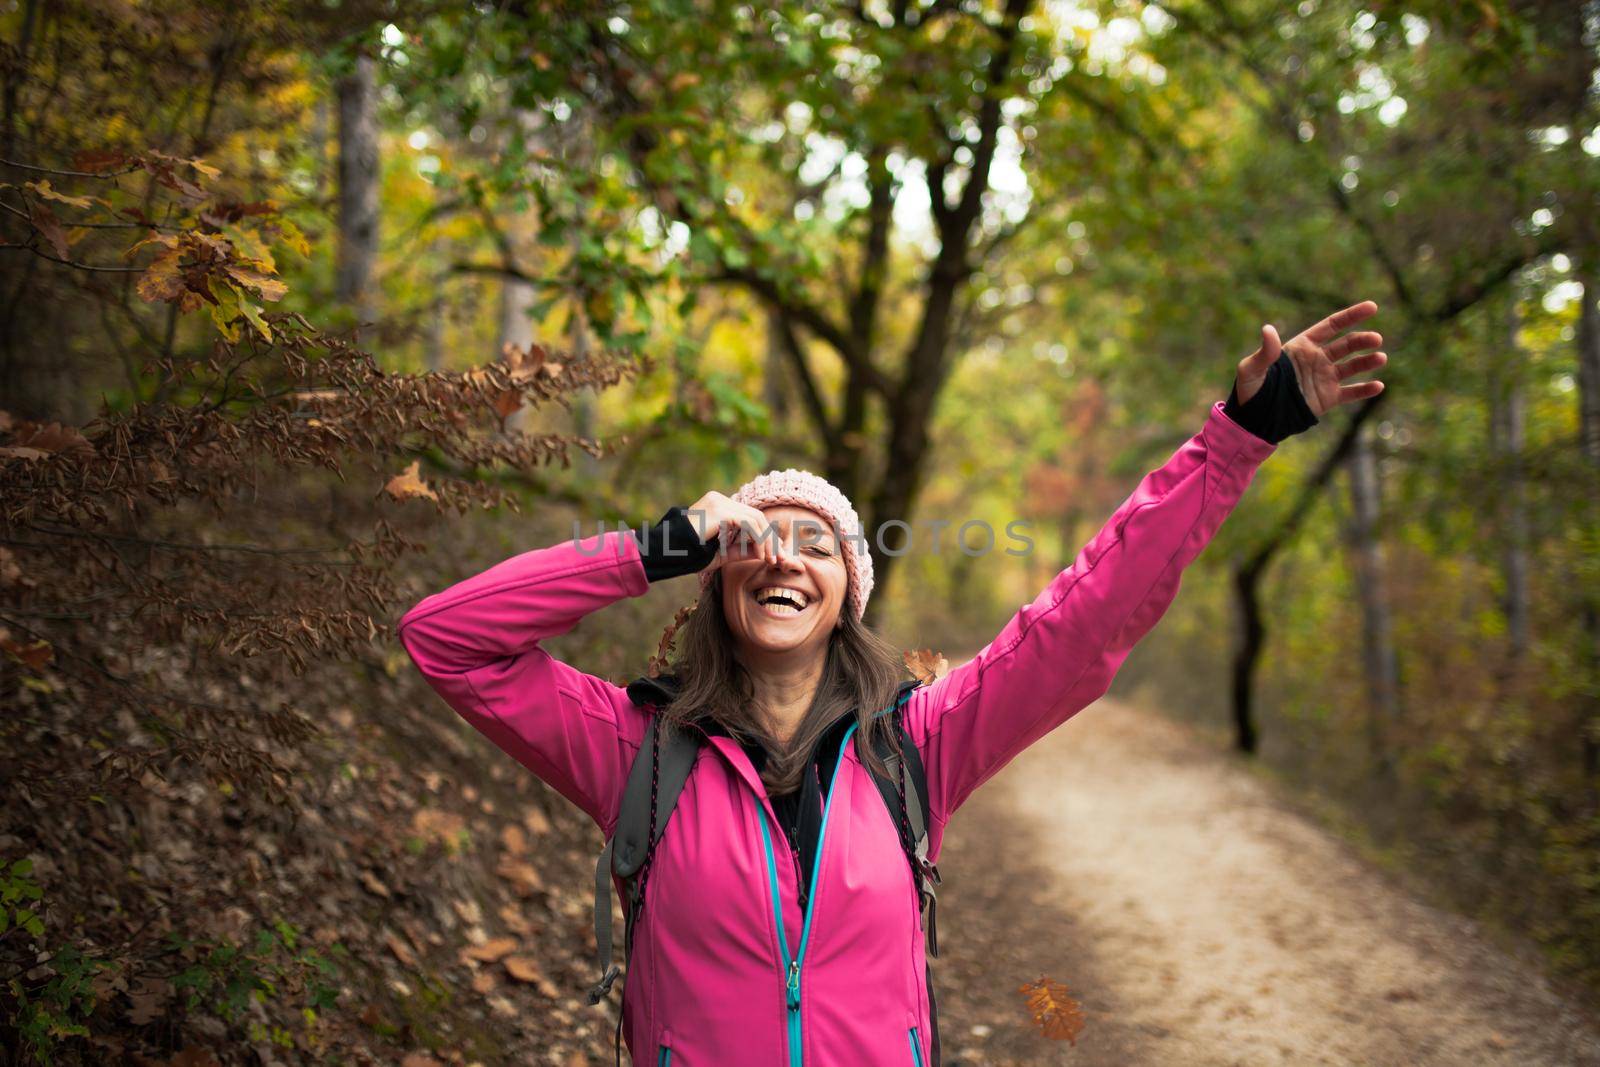 Hiking girl in pink on a trail in the forest. Hands up enjoying the falling leaves in nature in fall season. by kokimk